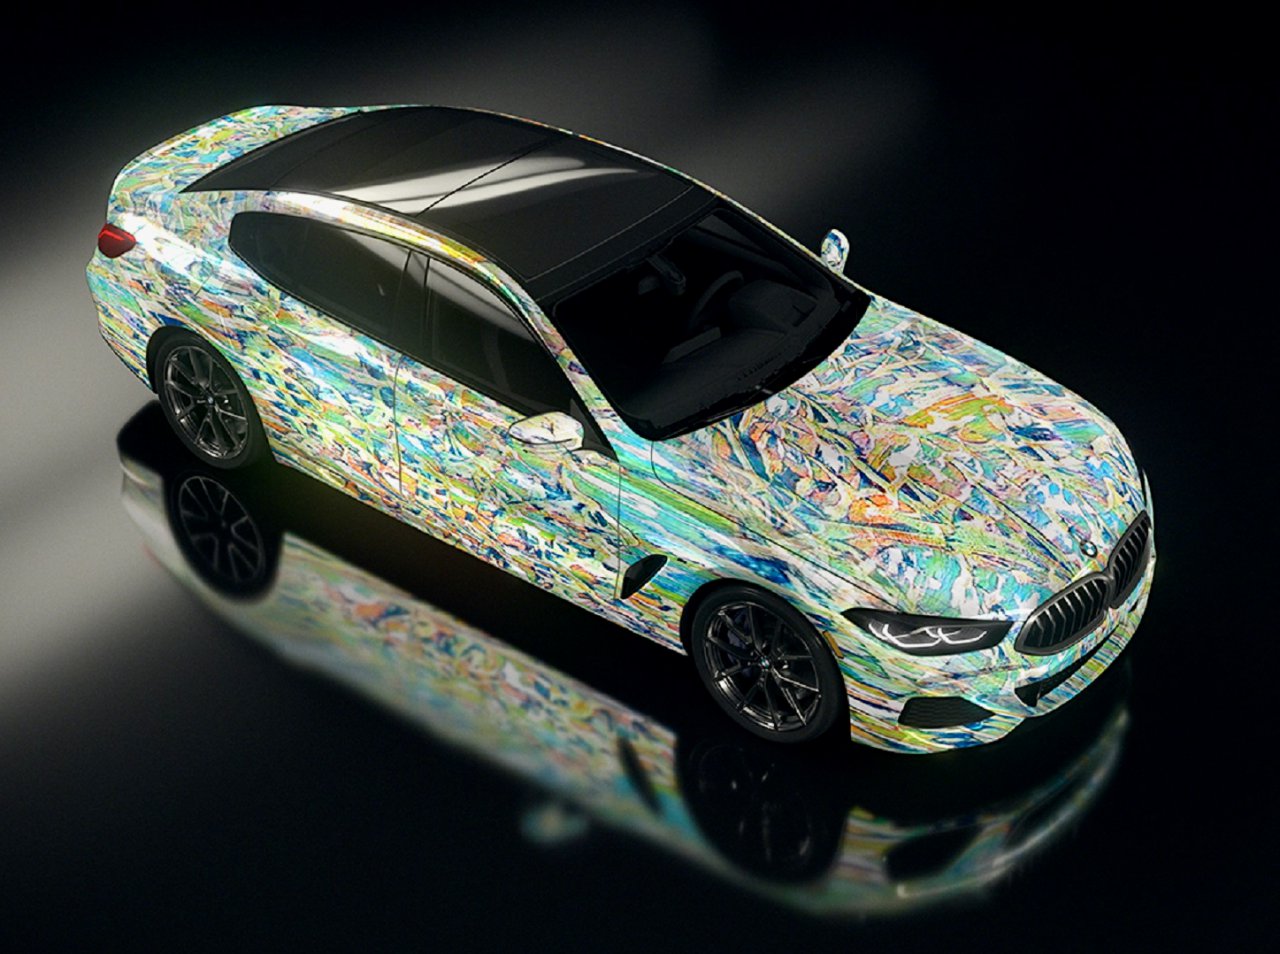 art cars, This round of BMW art cars done with artificial intelligence, ClassicCars.com Journal